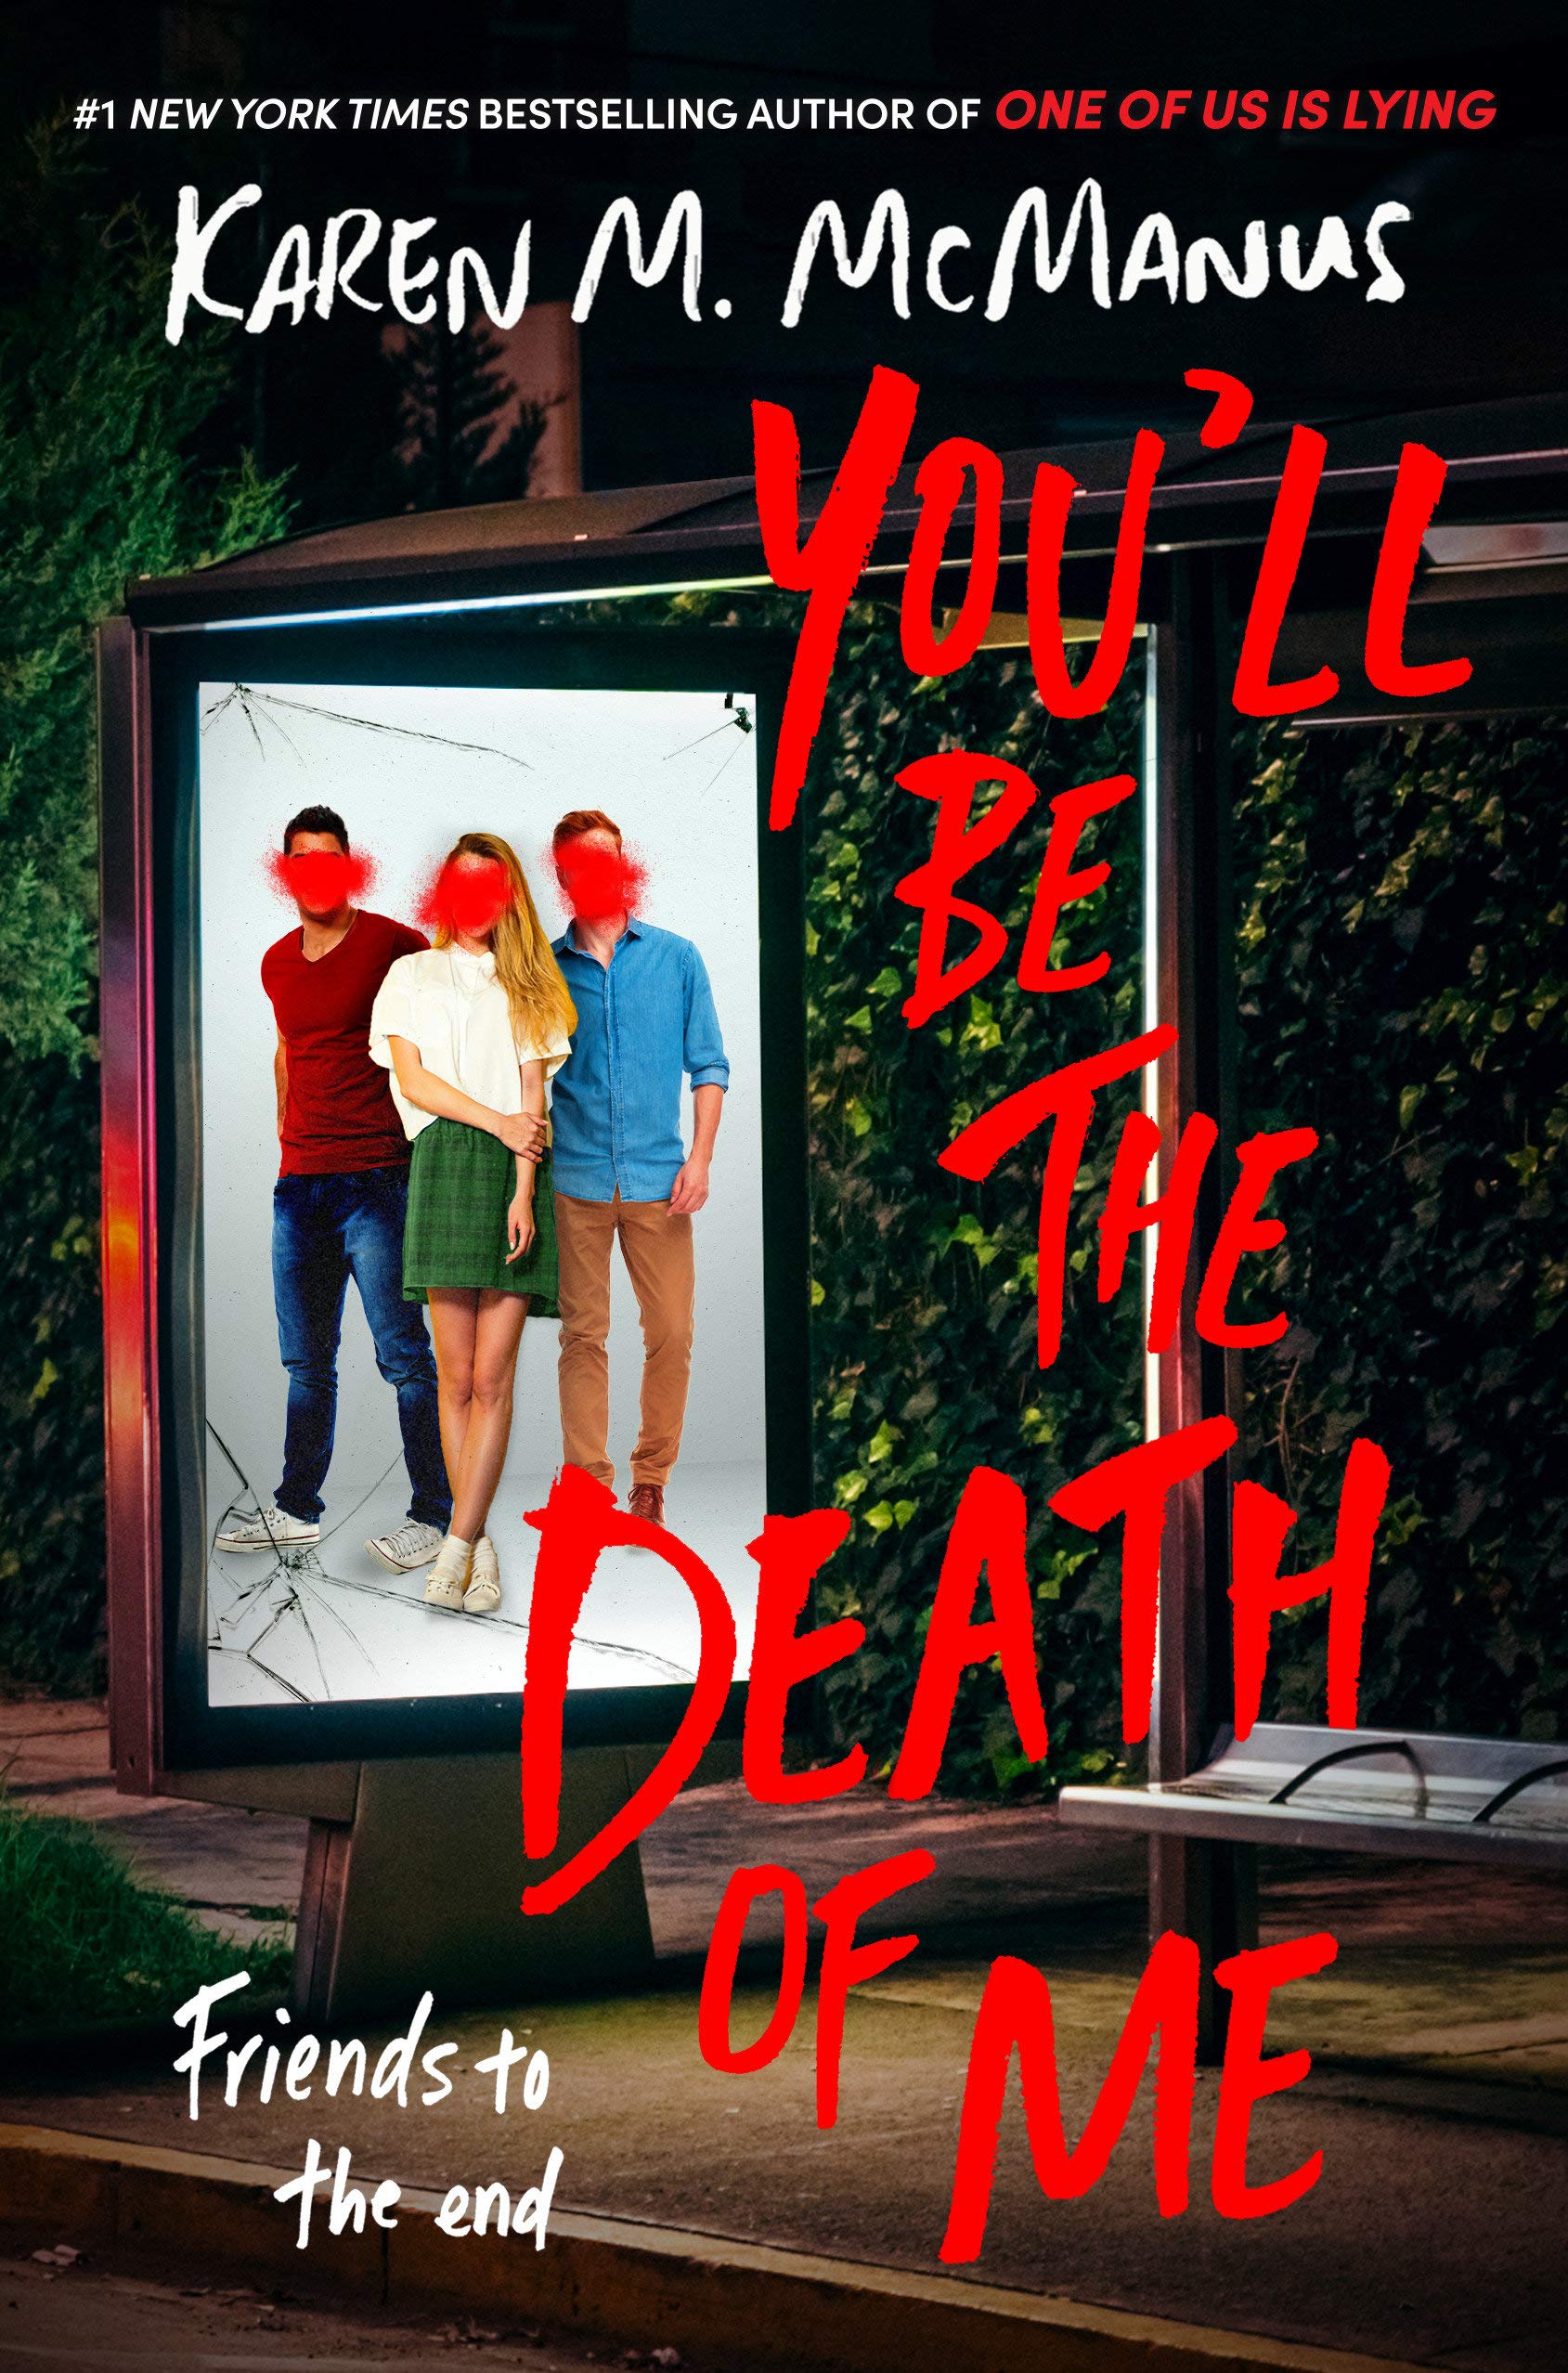 Cover of “You’ll Be the Death of Me” by Karen M. McManus